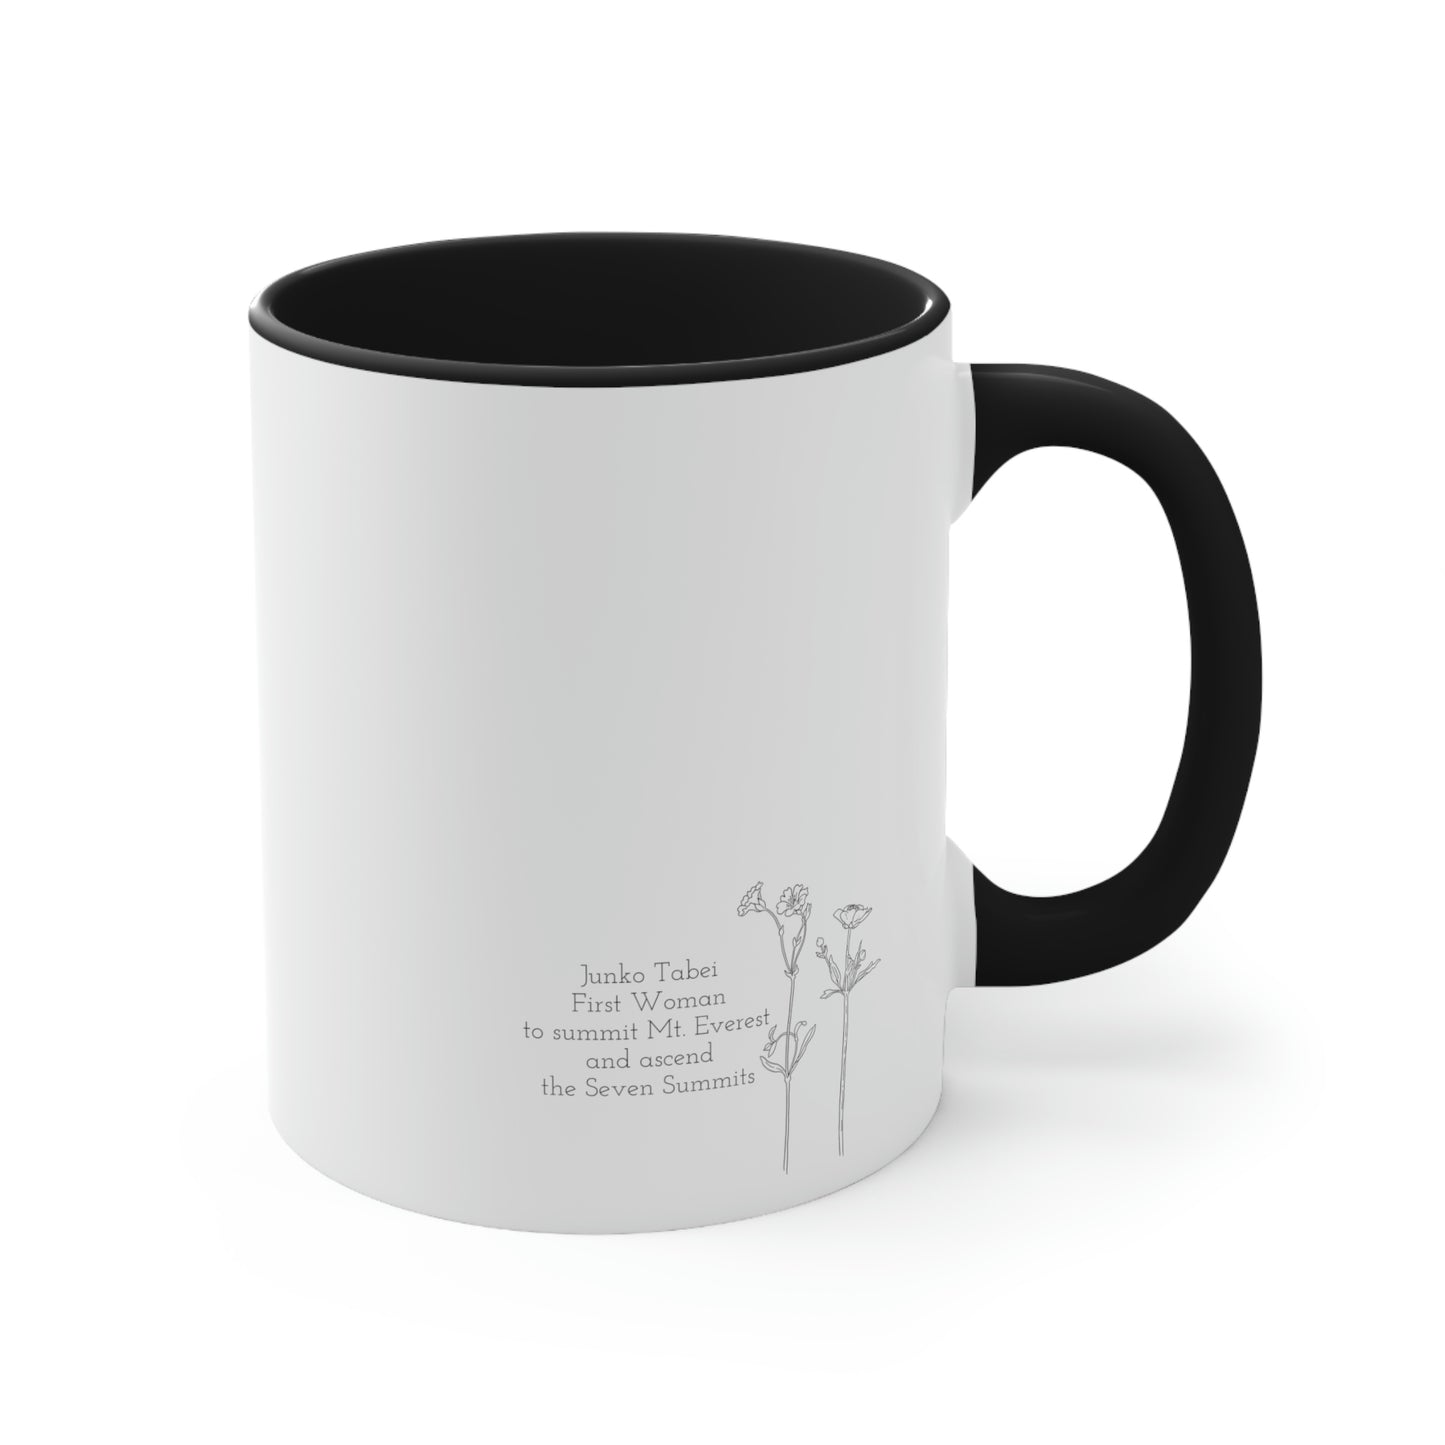 "Willpower that is most important" Accent Coffee Mug, 11oz